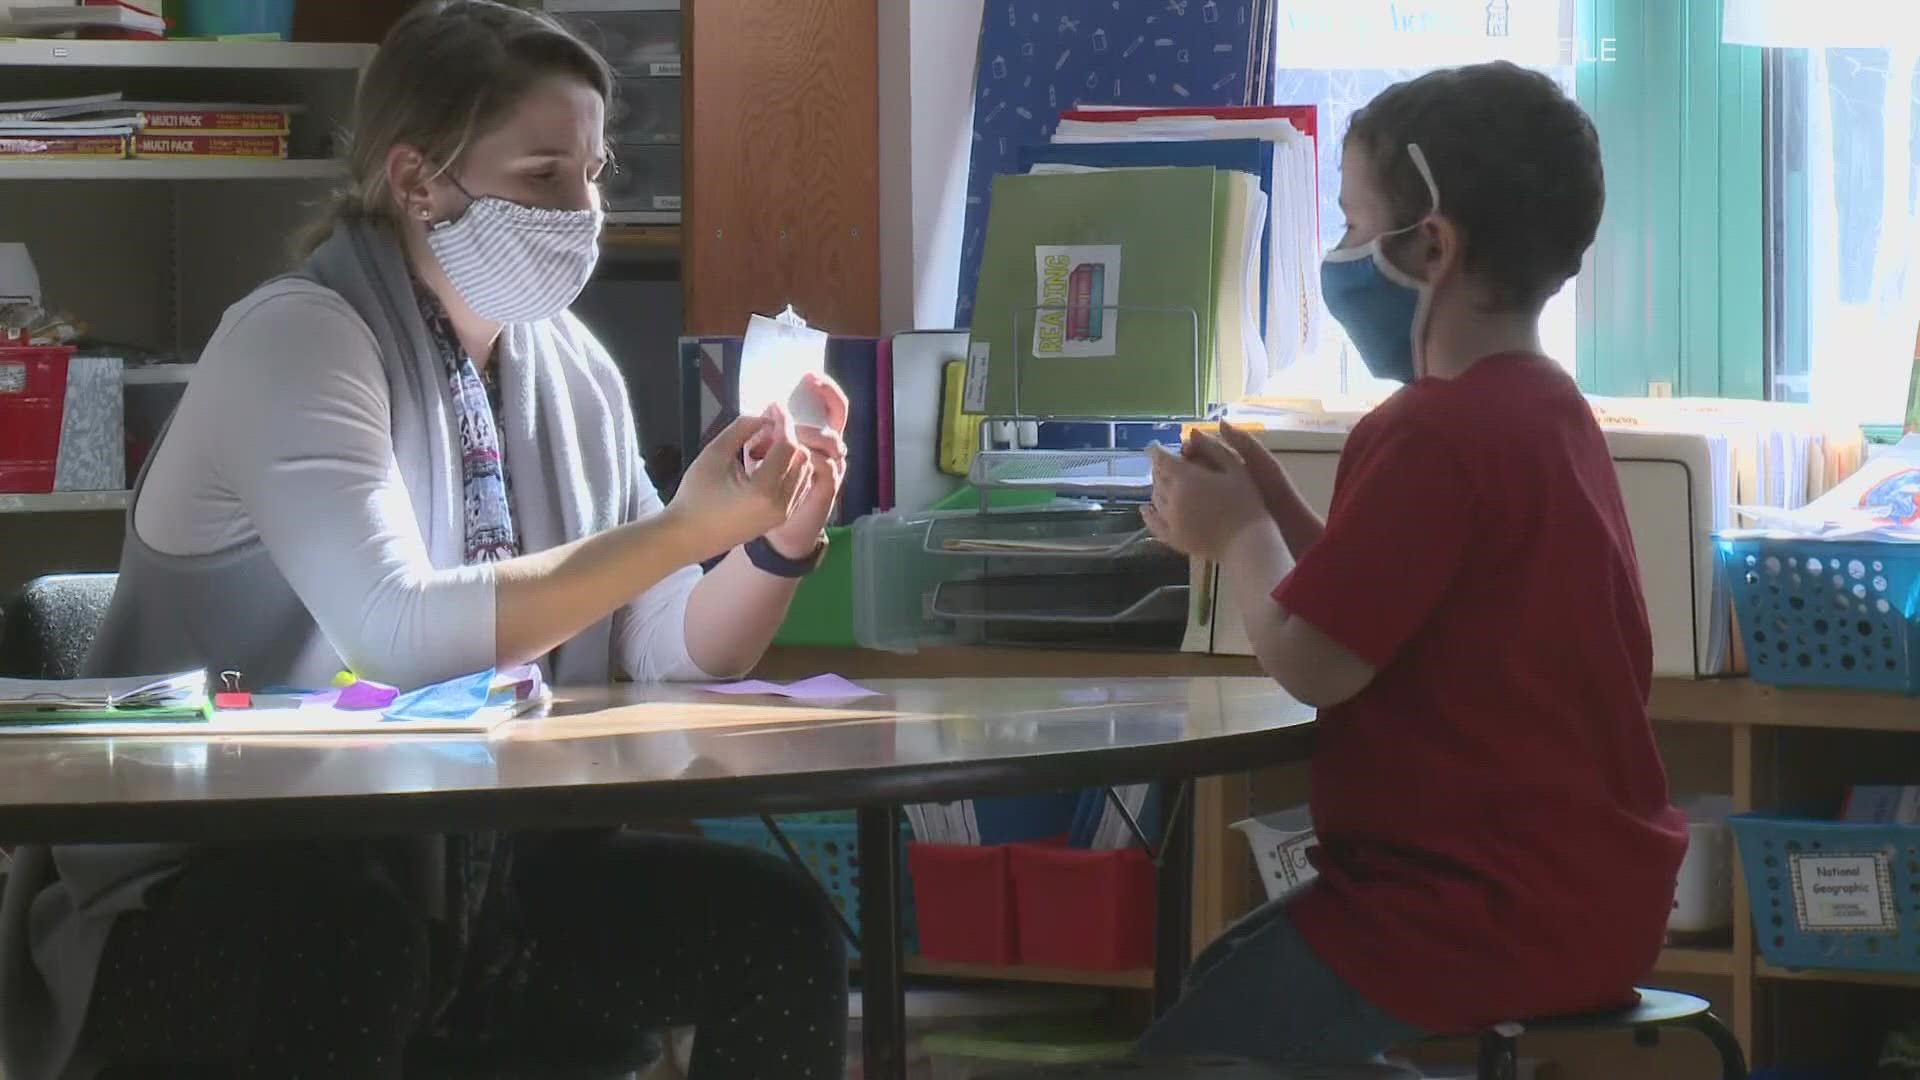 That guidance recommends all people all students, staff, teachers, and visitors age 2 and older wear a mask indoors, regardless of vaccination status.